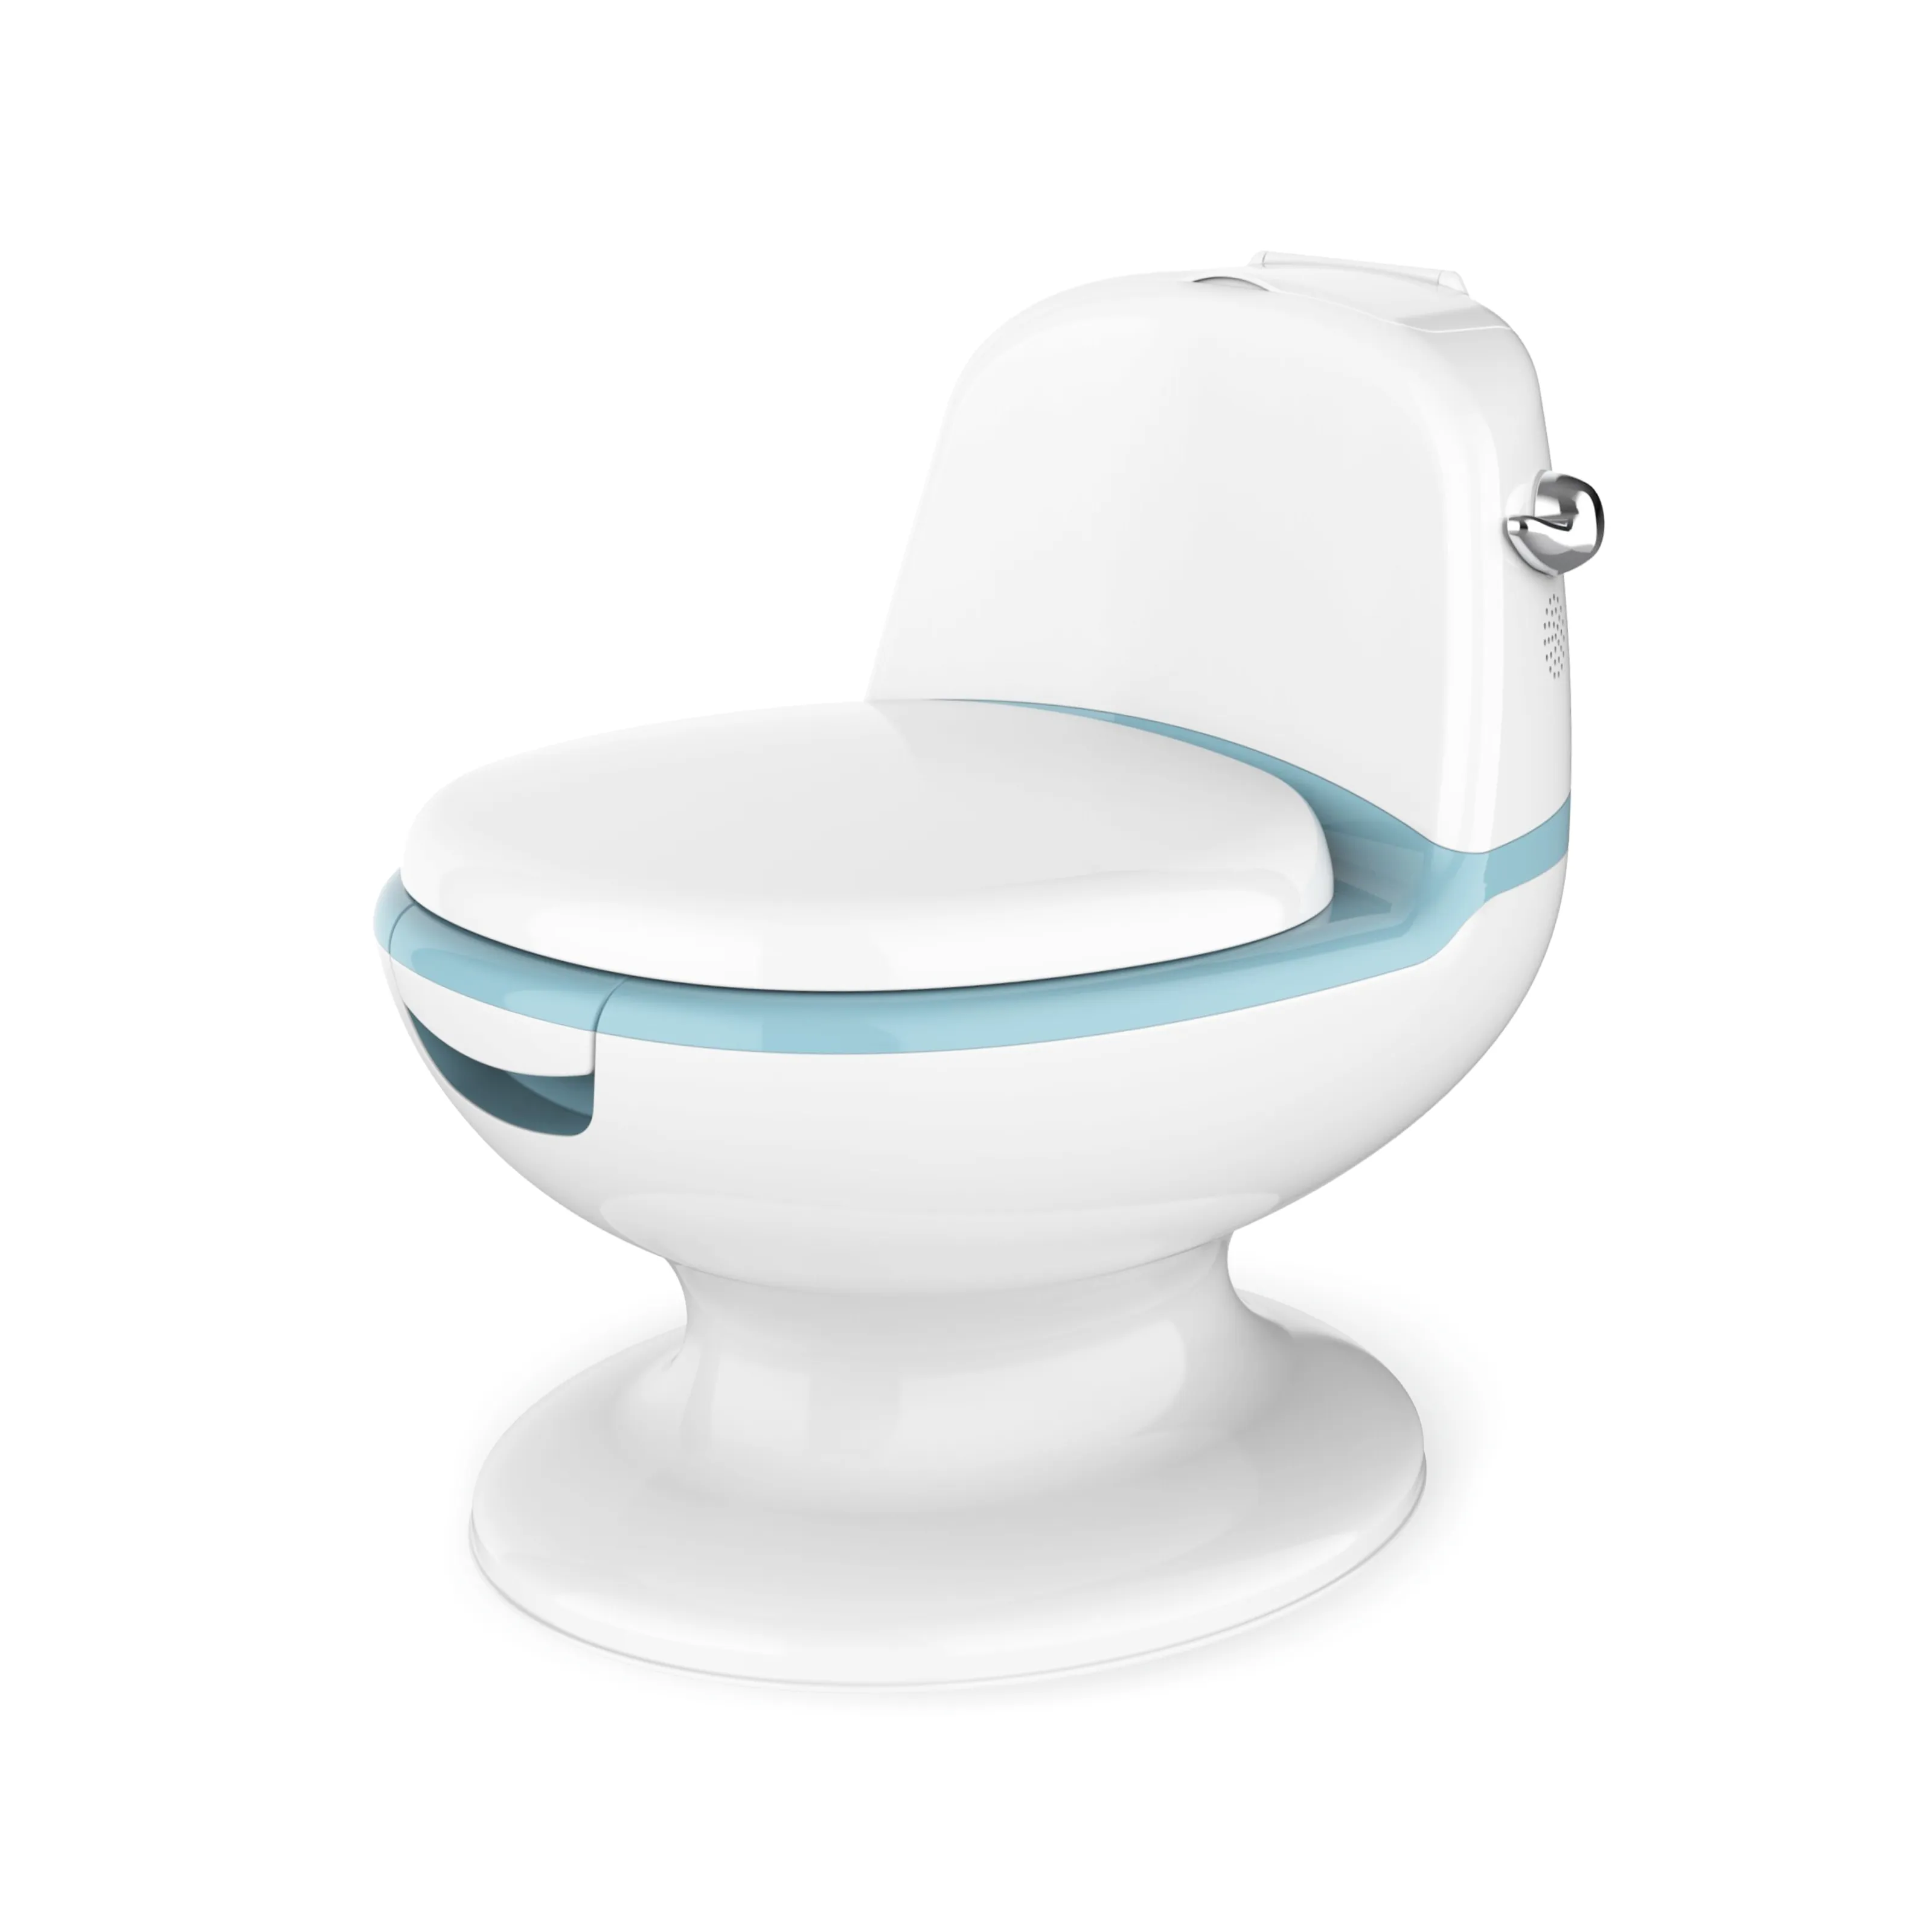 Eco-friendly Simulation Potty Toilet with Flushing Sounds Potty Training Children Popular Kids Toilet Potty Trainer Seat Chair